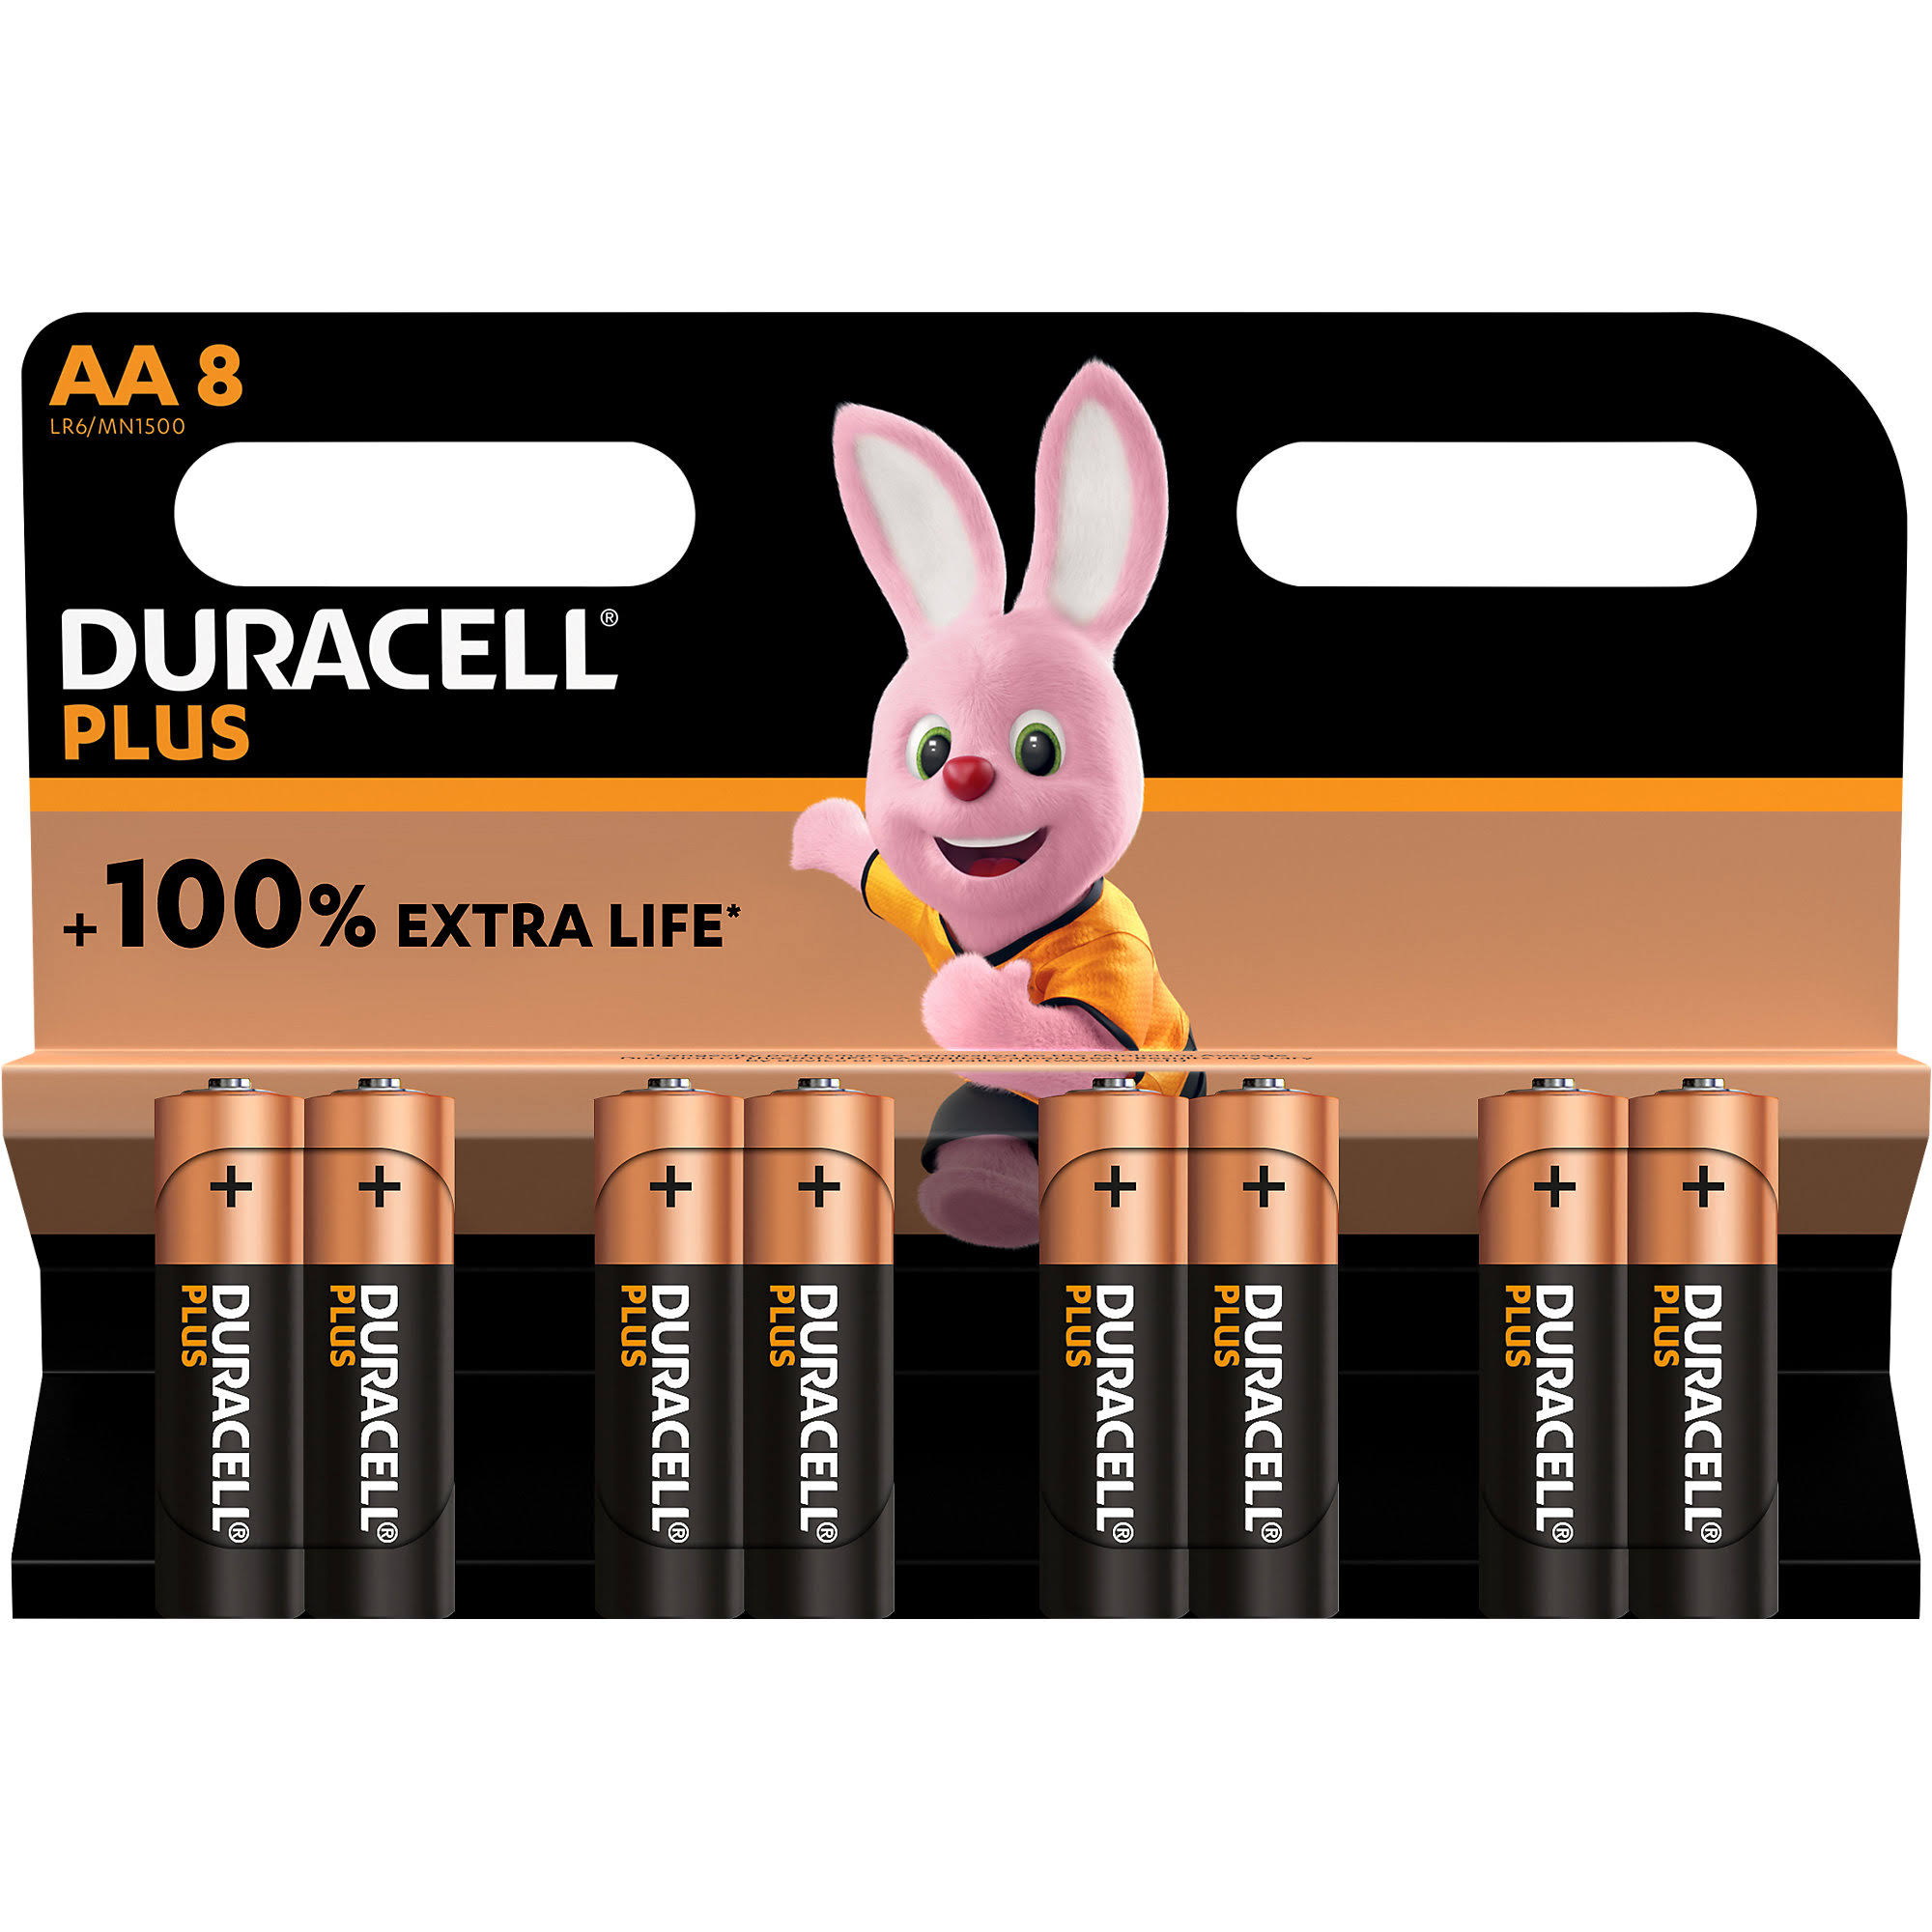 Duracell plus AA battery alkaline 100% extra life (8-pack)